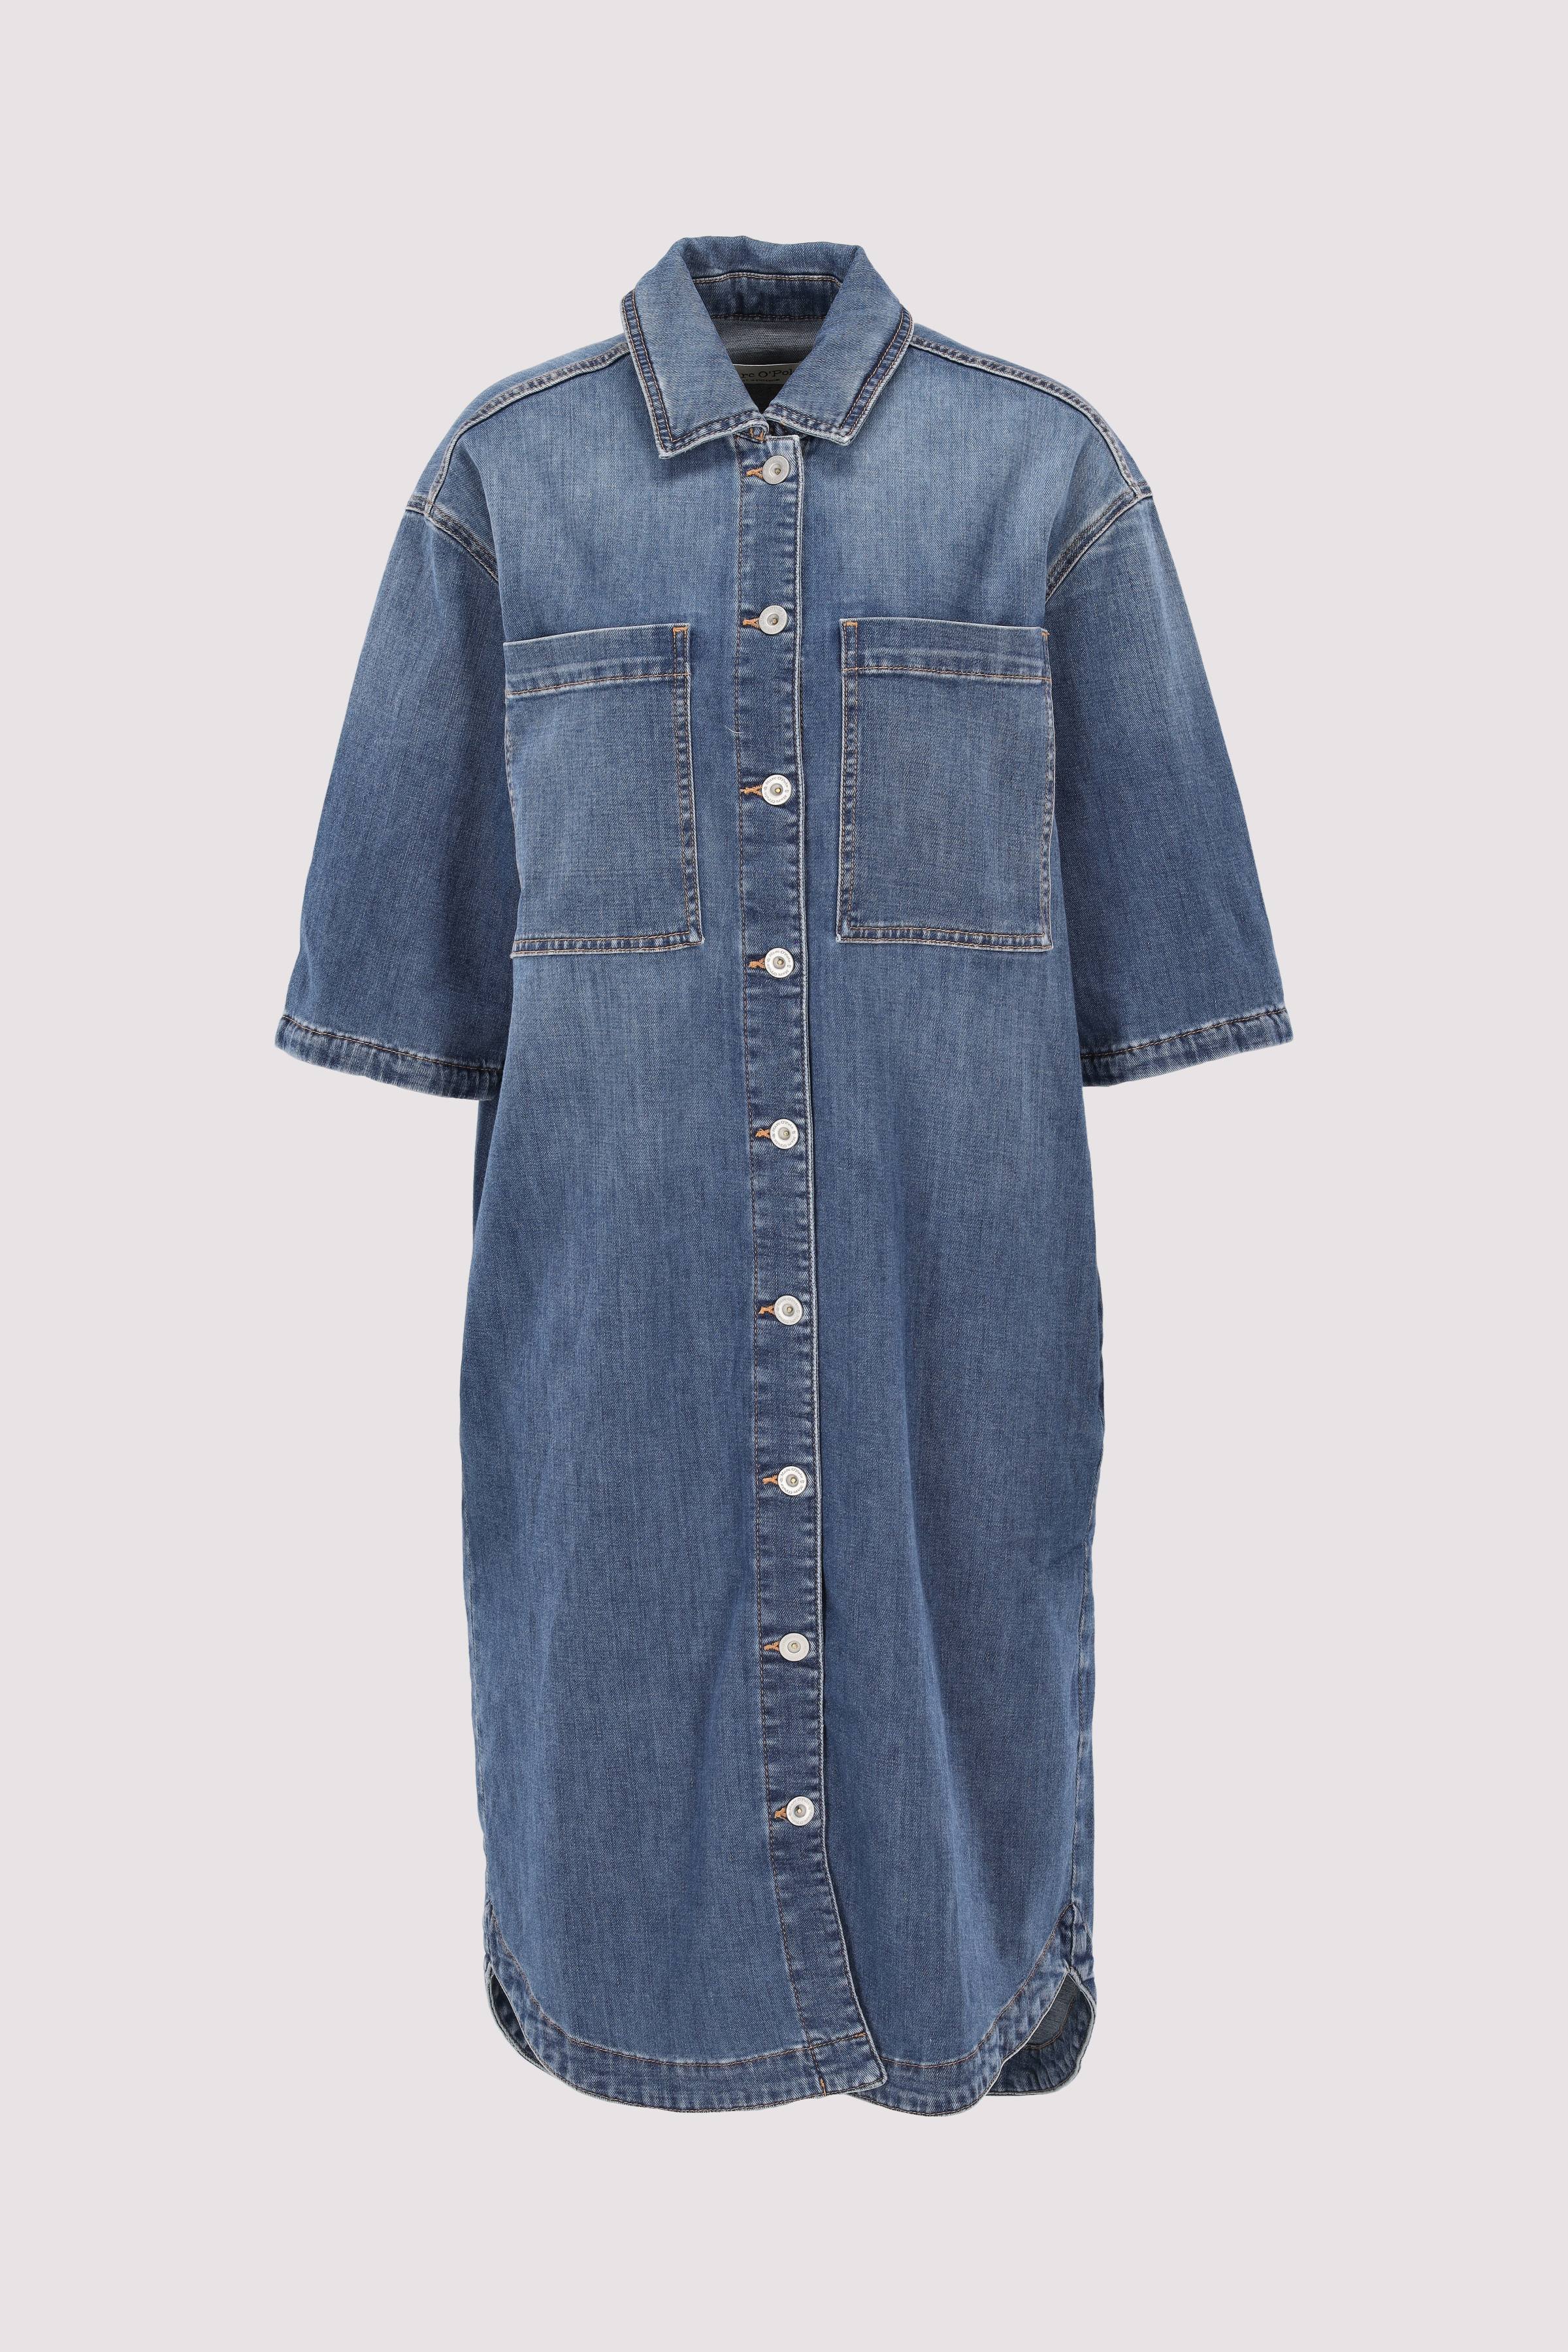 Denim dress, relaxed fit, ches